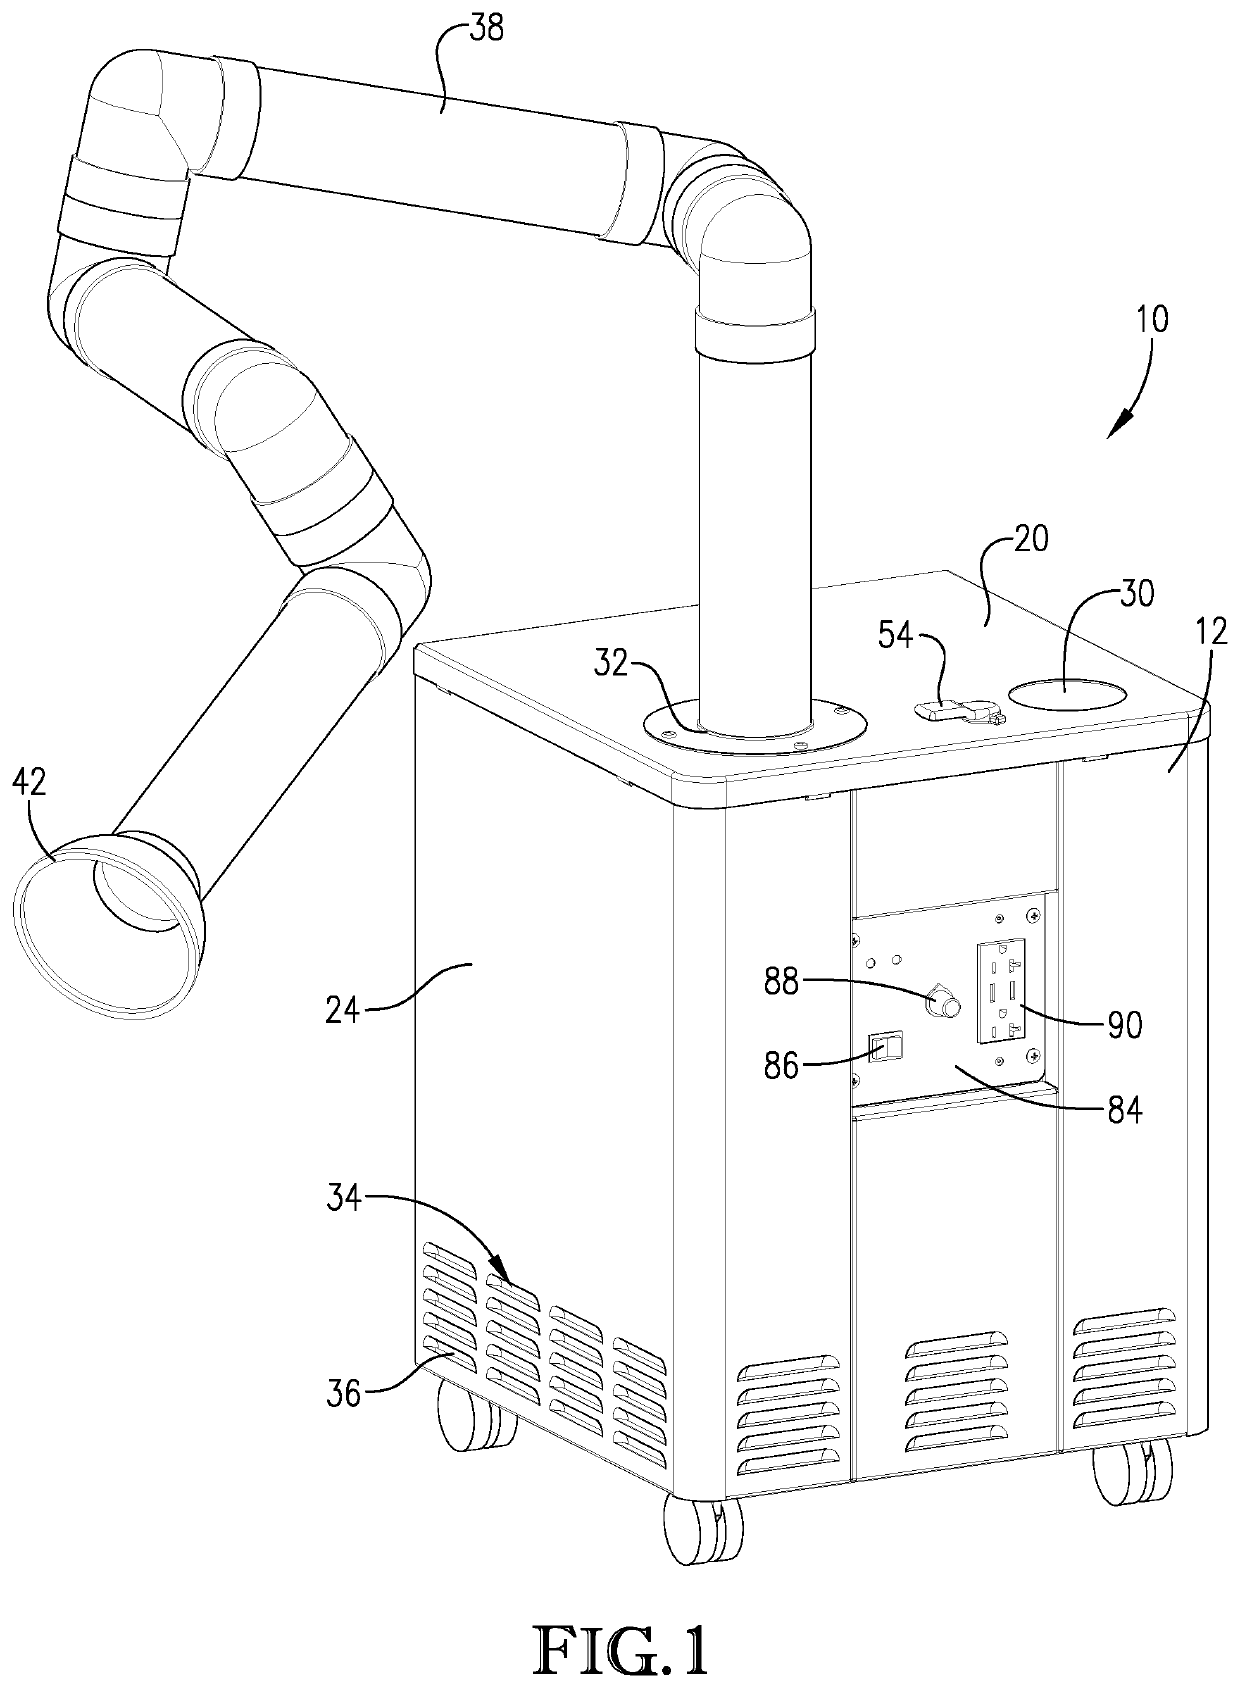 Air purification system